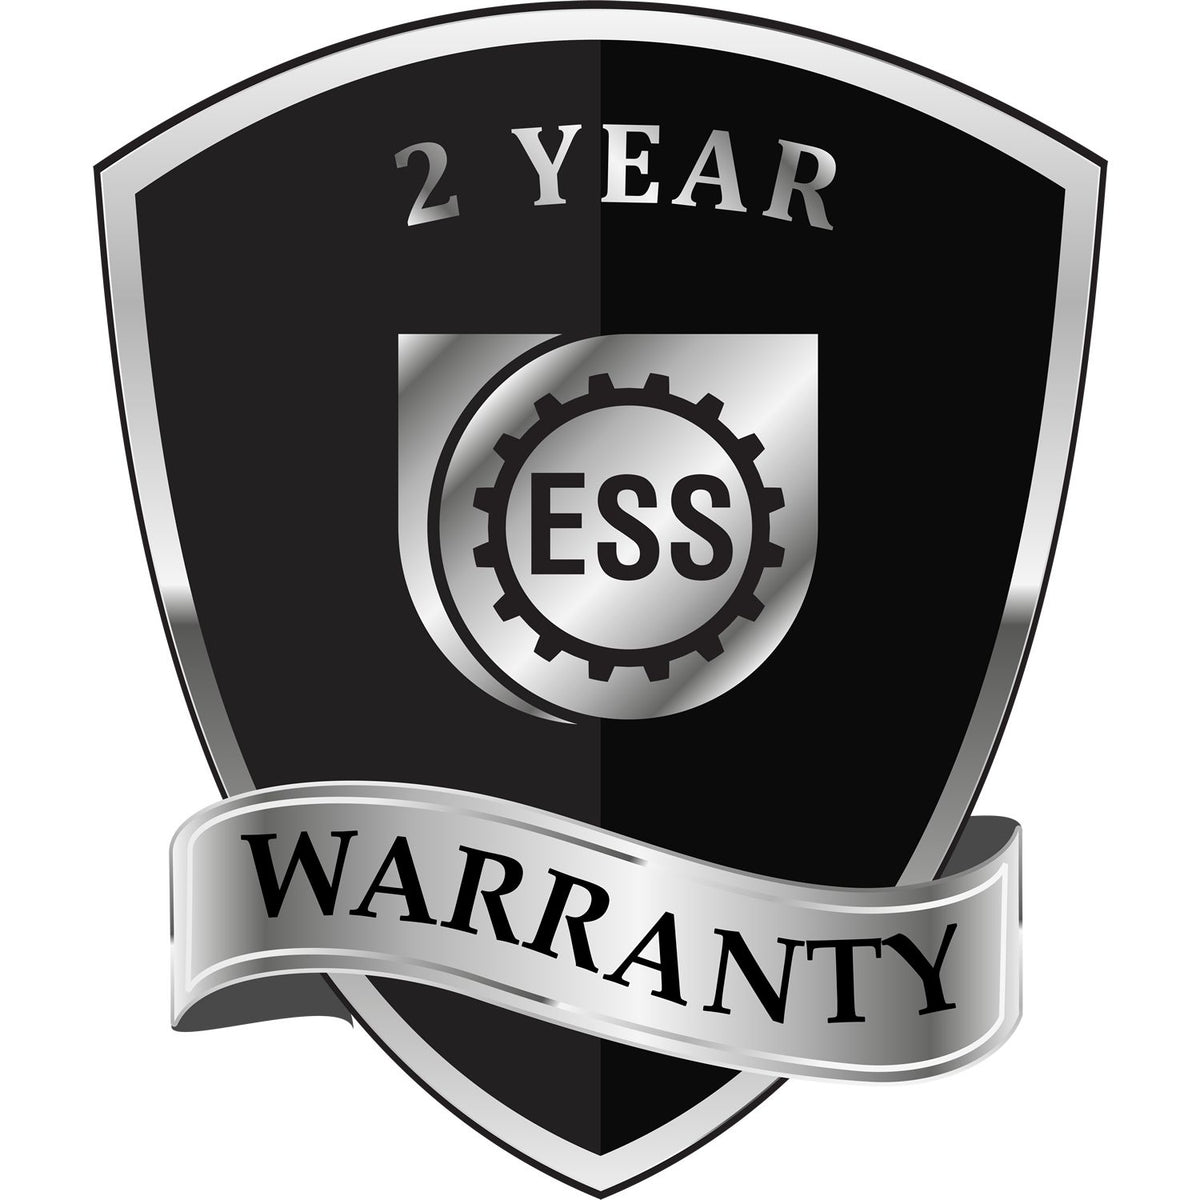 A black and silver badge or emblem showing warranty information for the Gift Alabama Architect Seal